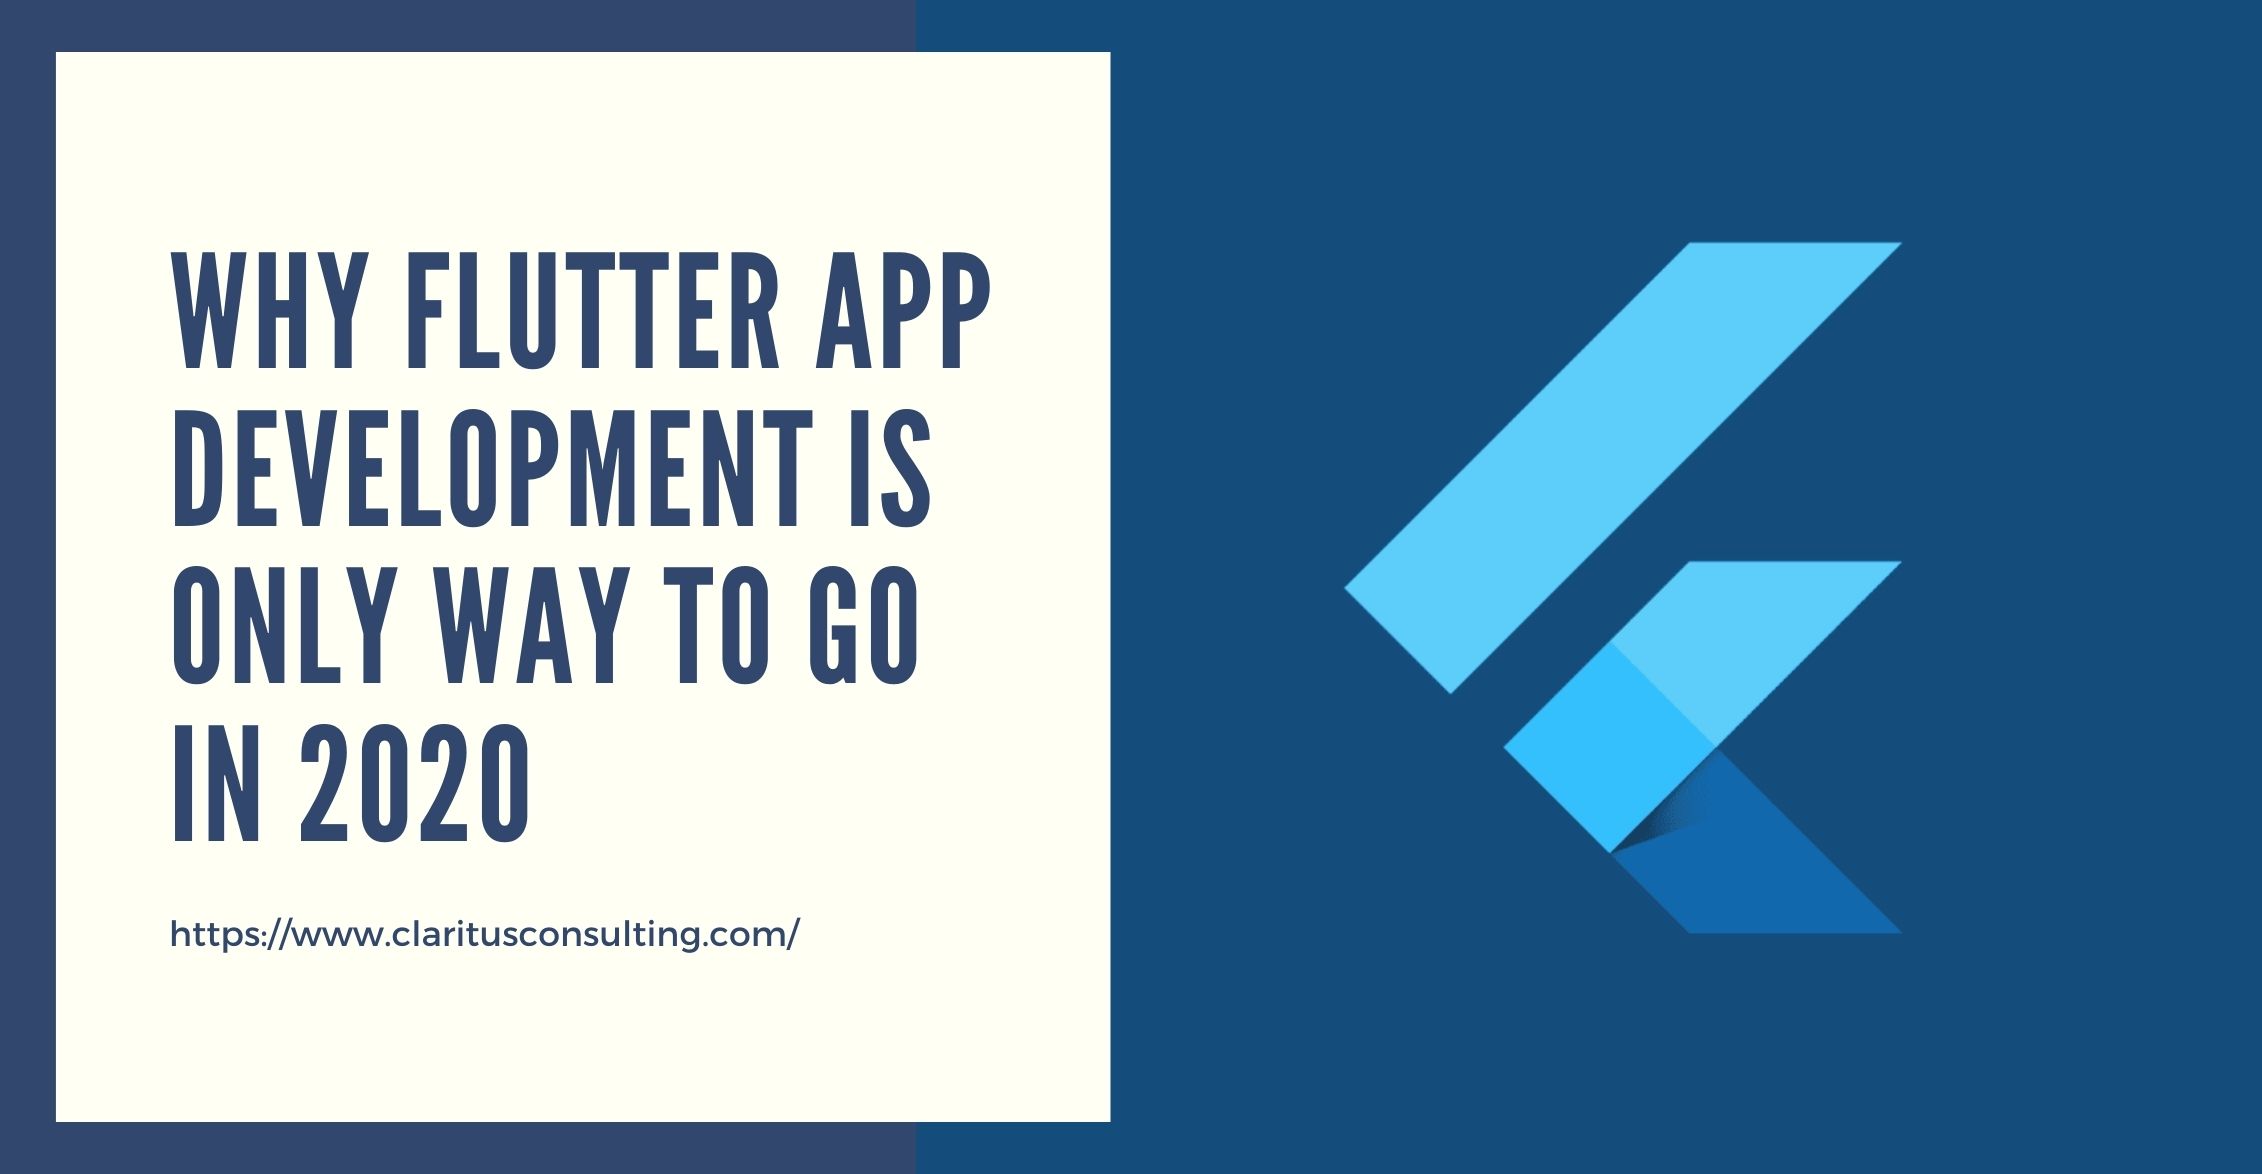 Why Flutter App Development IS ONLY WAY TO GO IN 2020